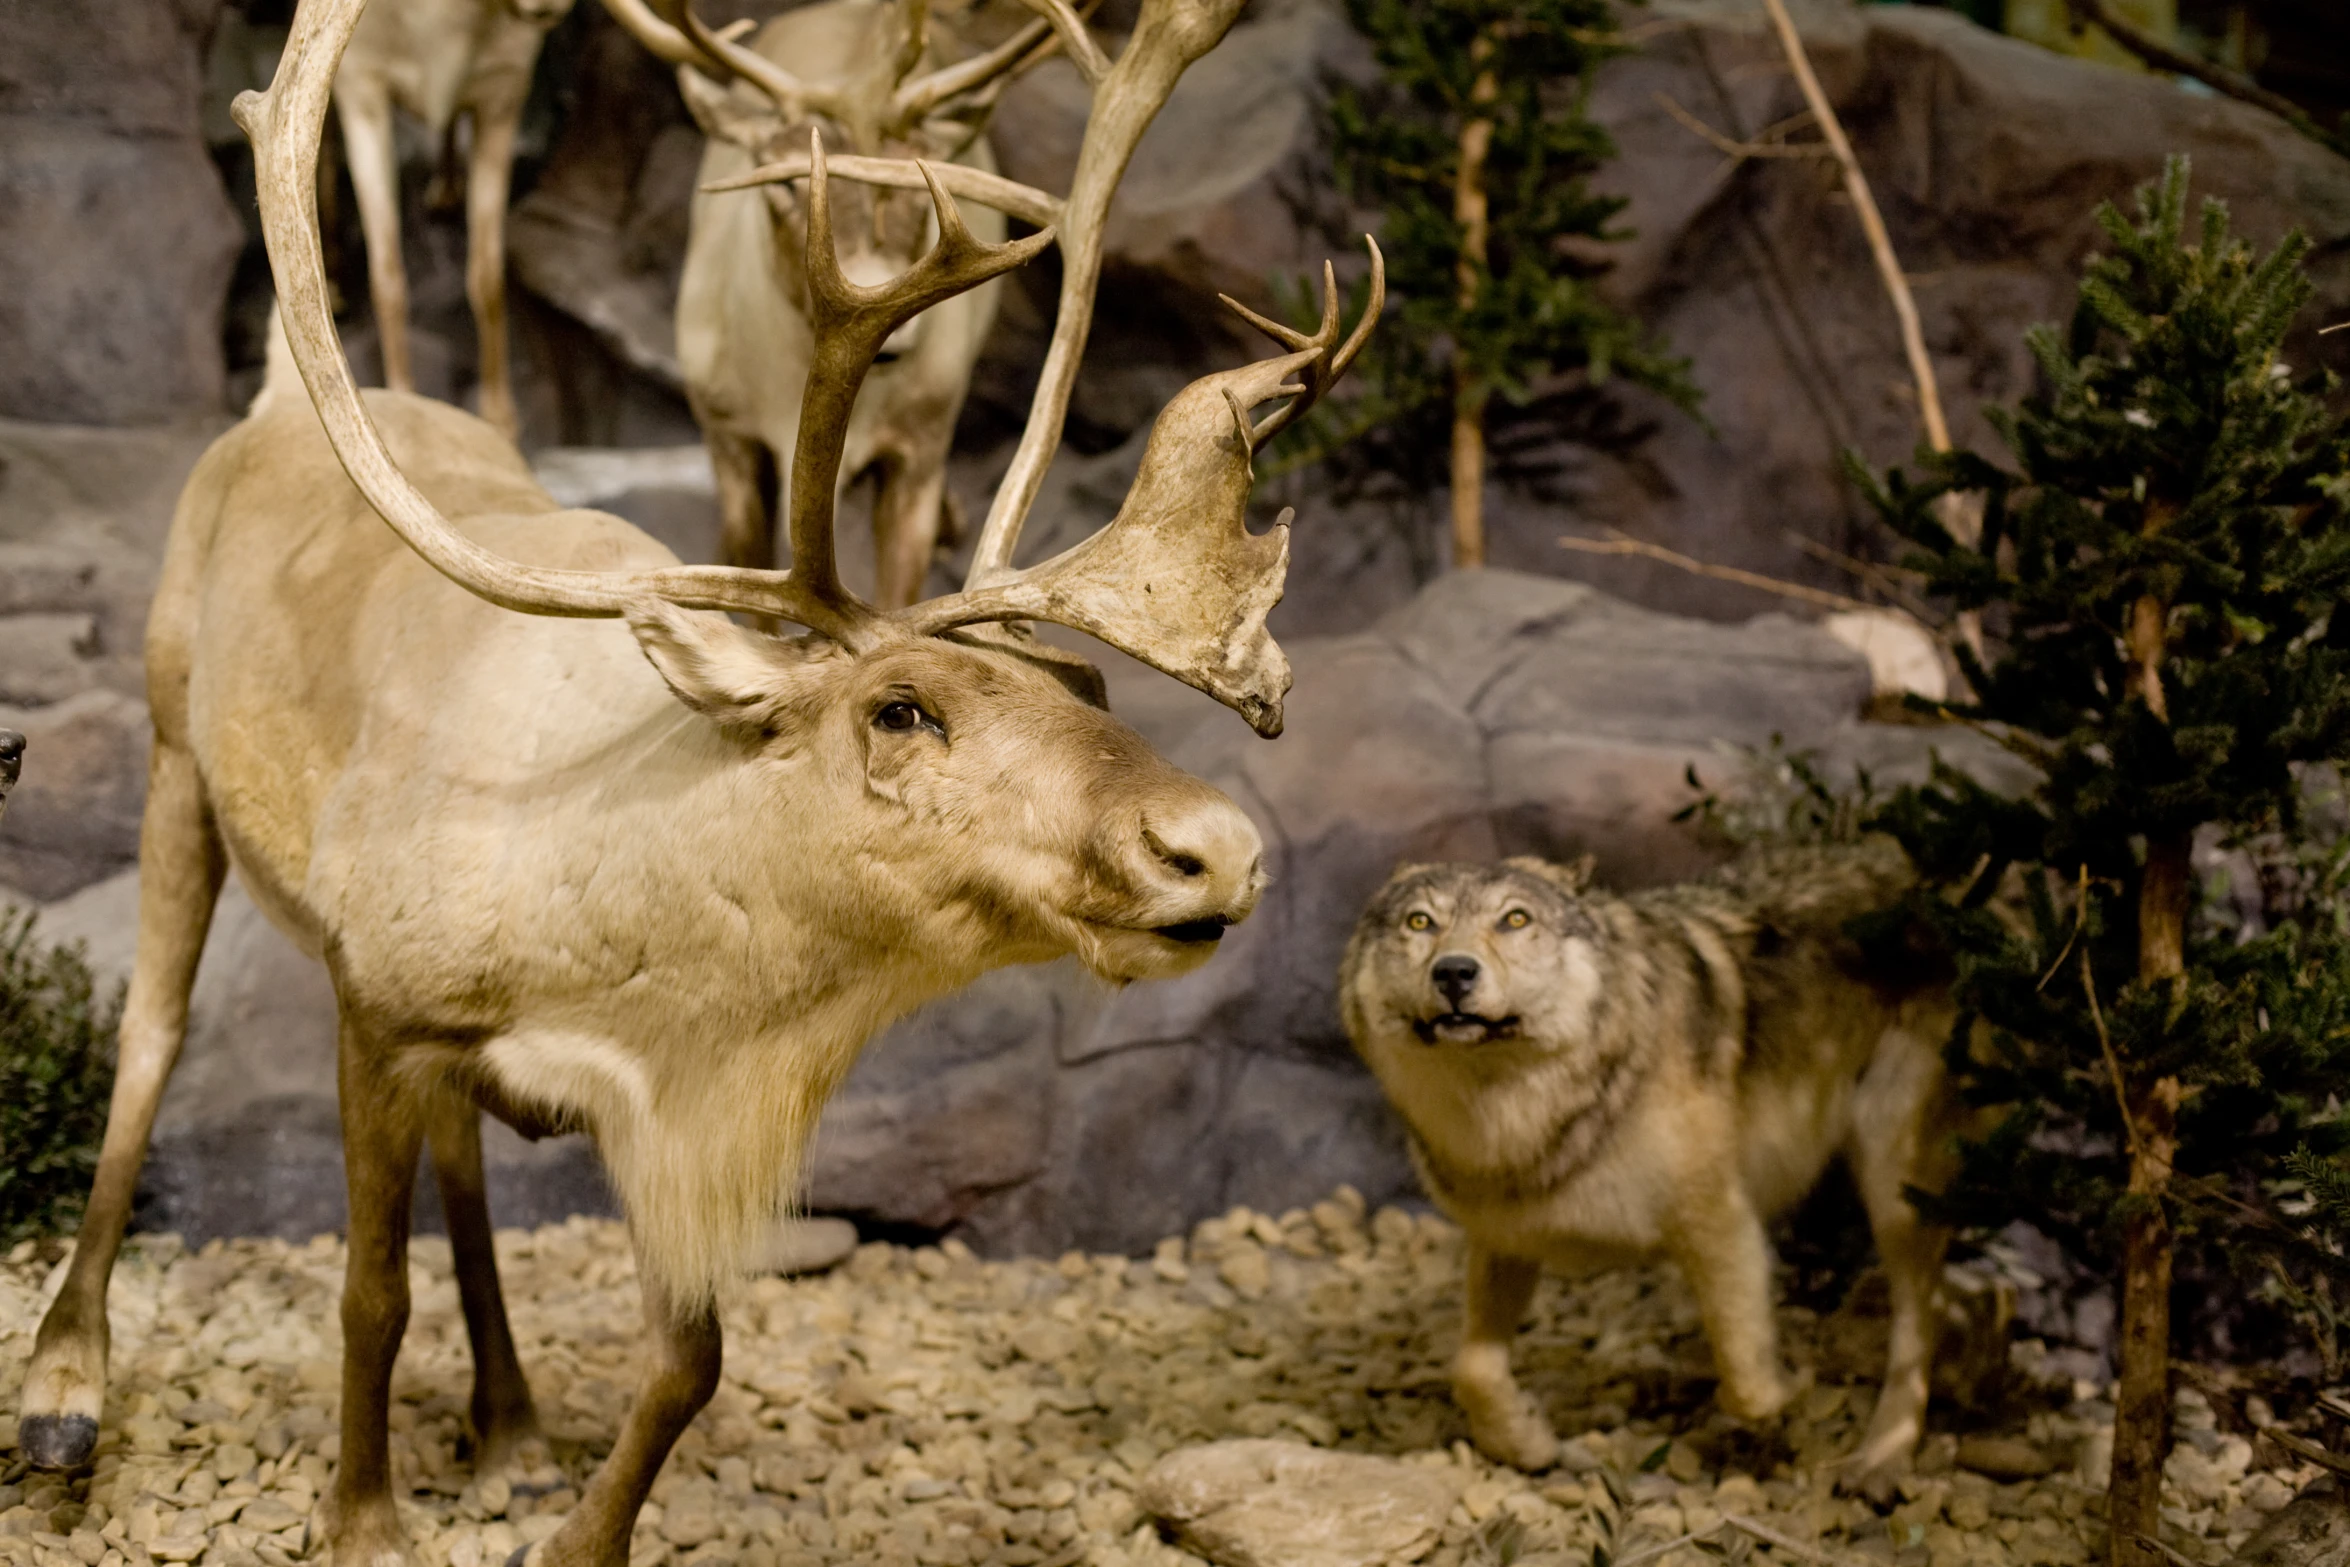 two horned animals standing next to each other in a rocky area